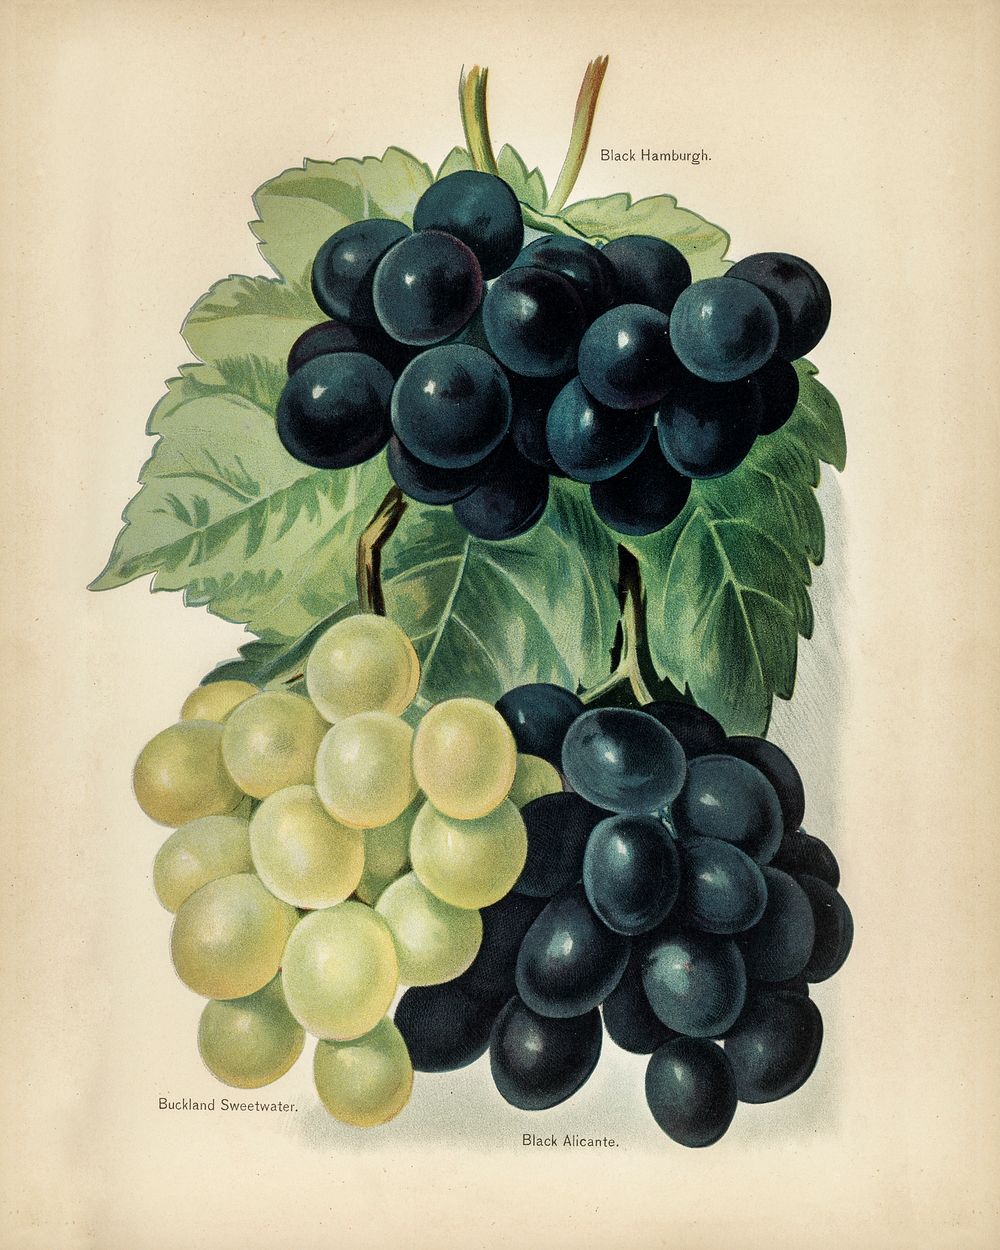 Vintage illustration of grape digitally enhanced from our own vintage edition of The Fruit Grower's Guide (1891) by John…